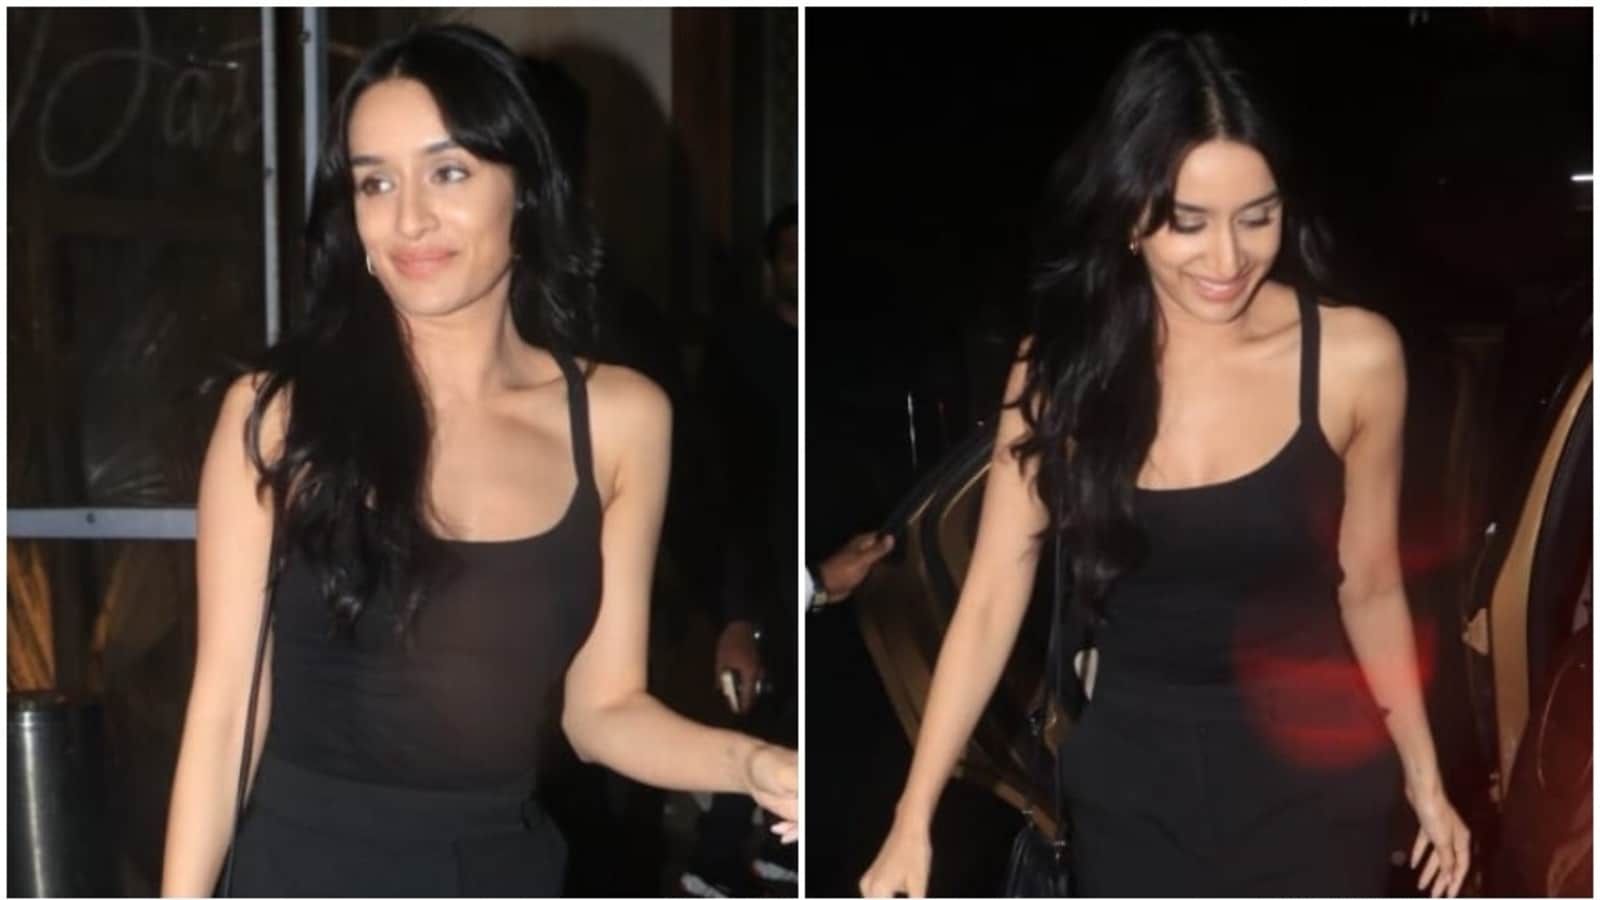 Sex Shraddha Kapoor Legs - Shraddha Kapoor in black tank top and satin pants pulls off effortless  girl-next-door look: See pics and video | Fashion Trends - Hindustan Times